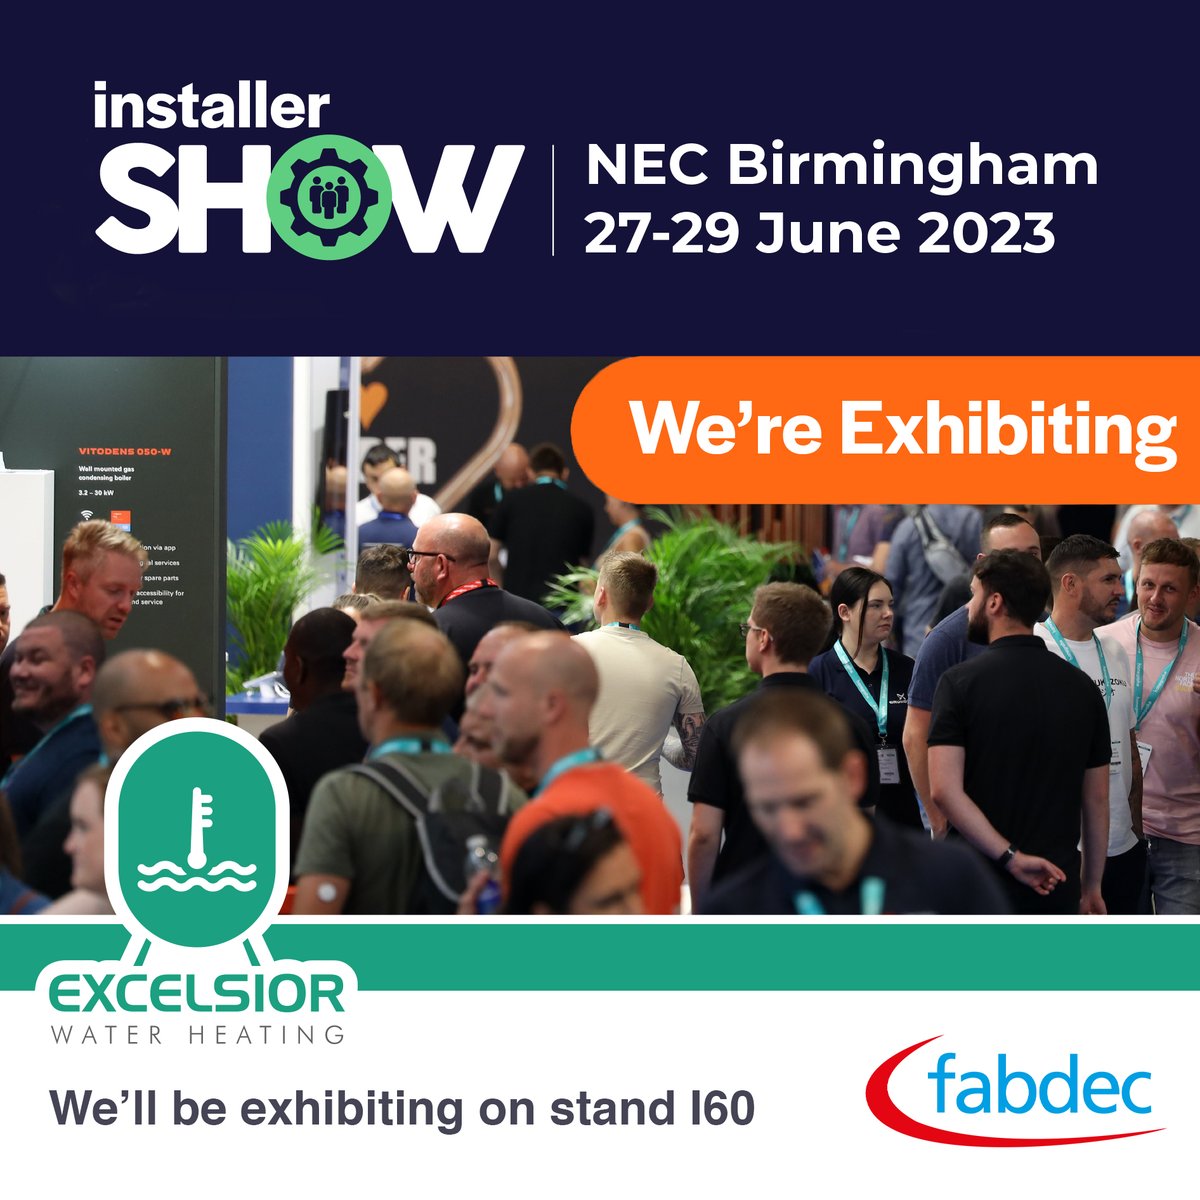 We will be exhibiting at @Installer_Show  2023 with our brand @Excelsiorwater running our stall. 

Be sure to come along and see us from the 27th until the 29th of June at the NEC, Birmingham, stand number I60.

Don't miss out!

fabdec.com/en/installersh…

#tradeshow